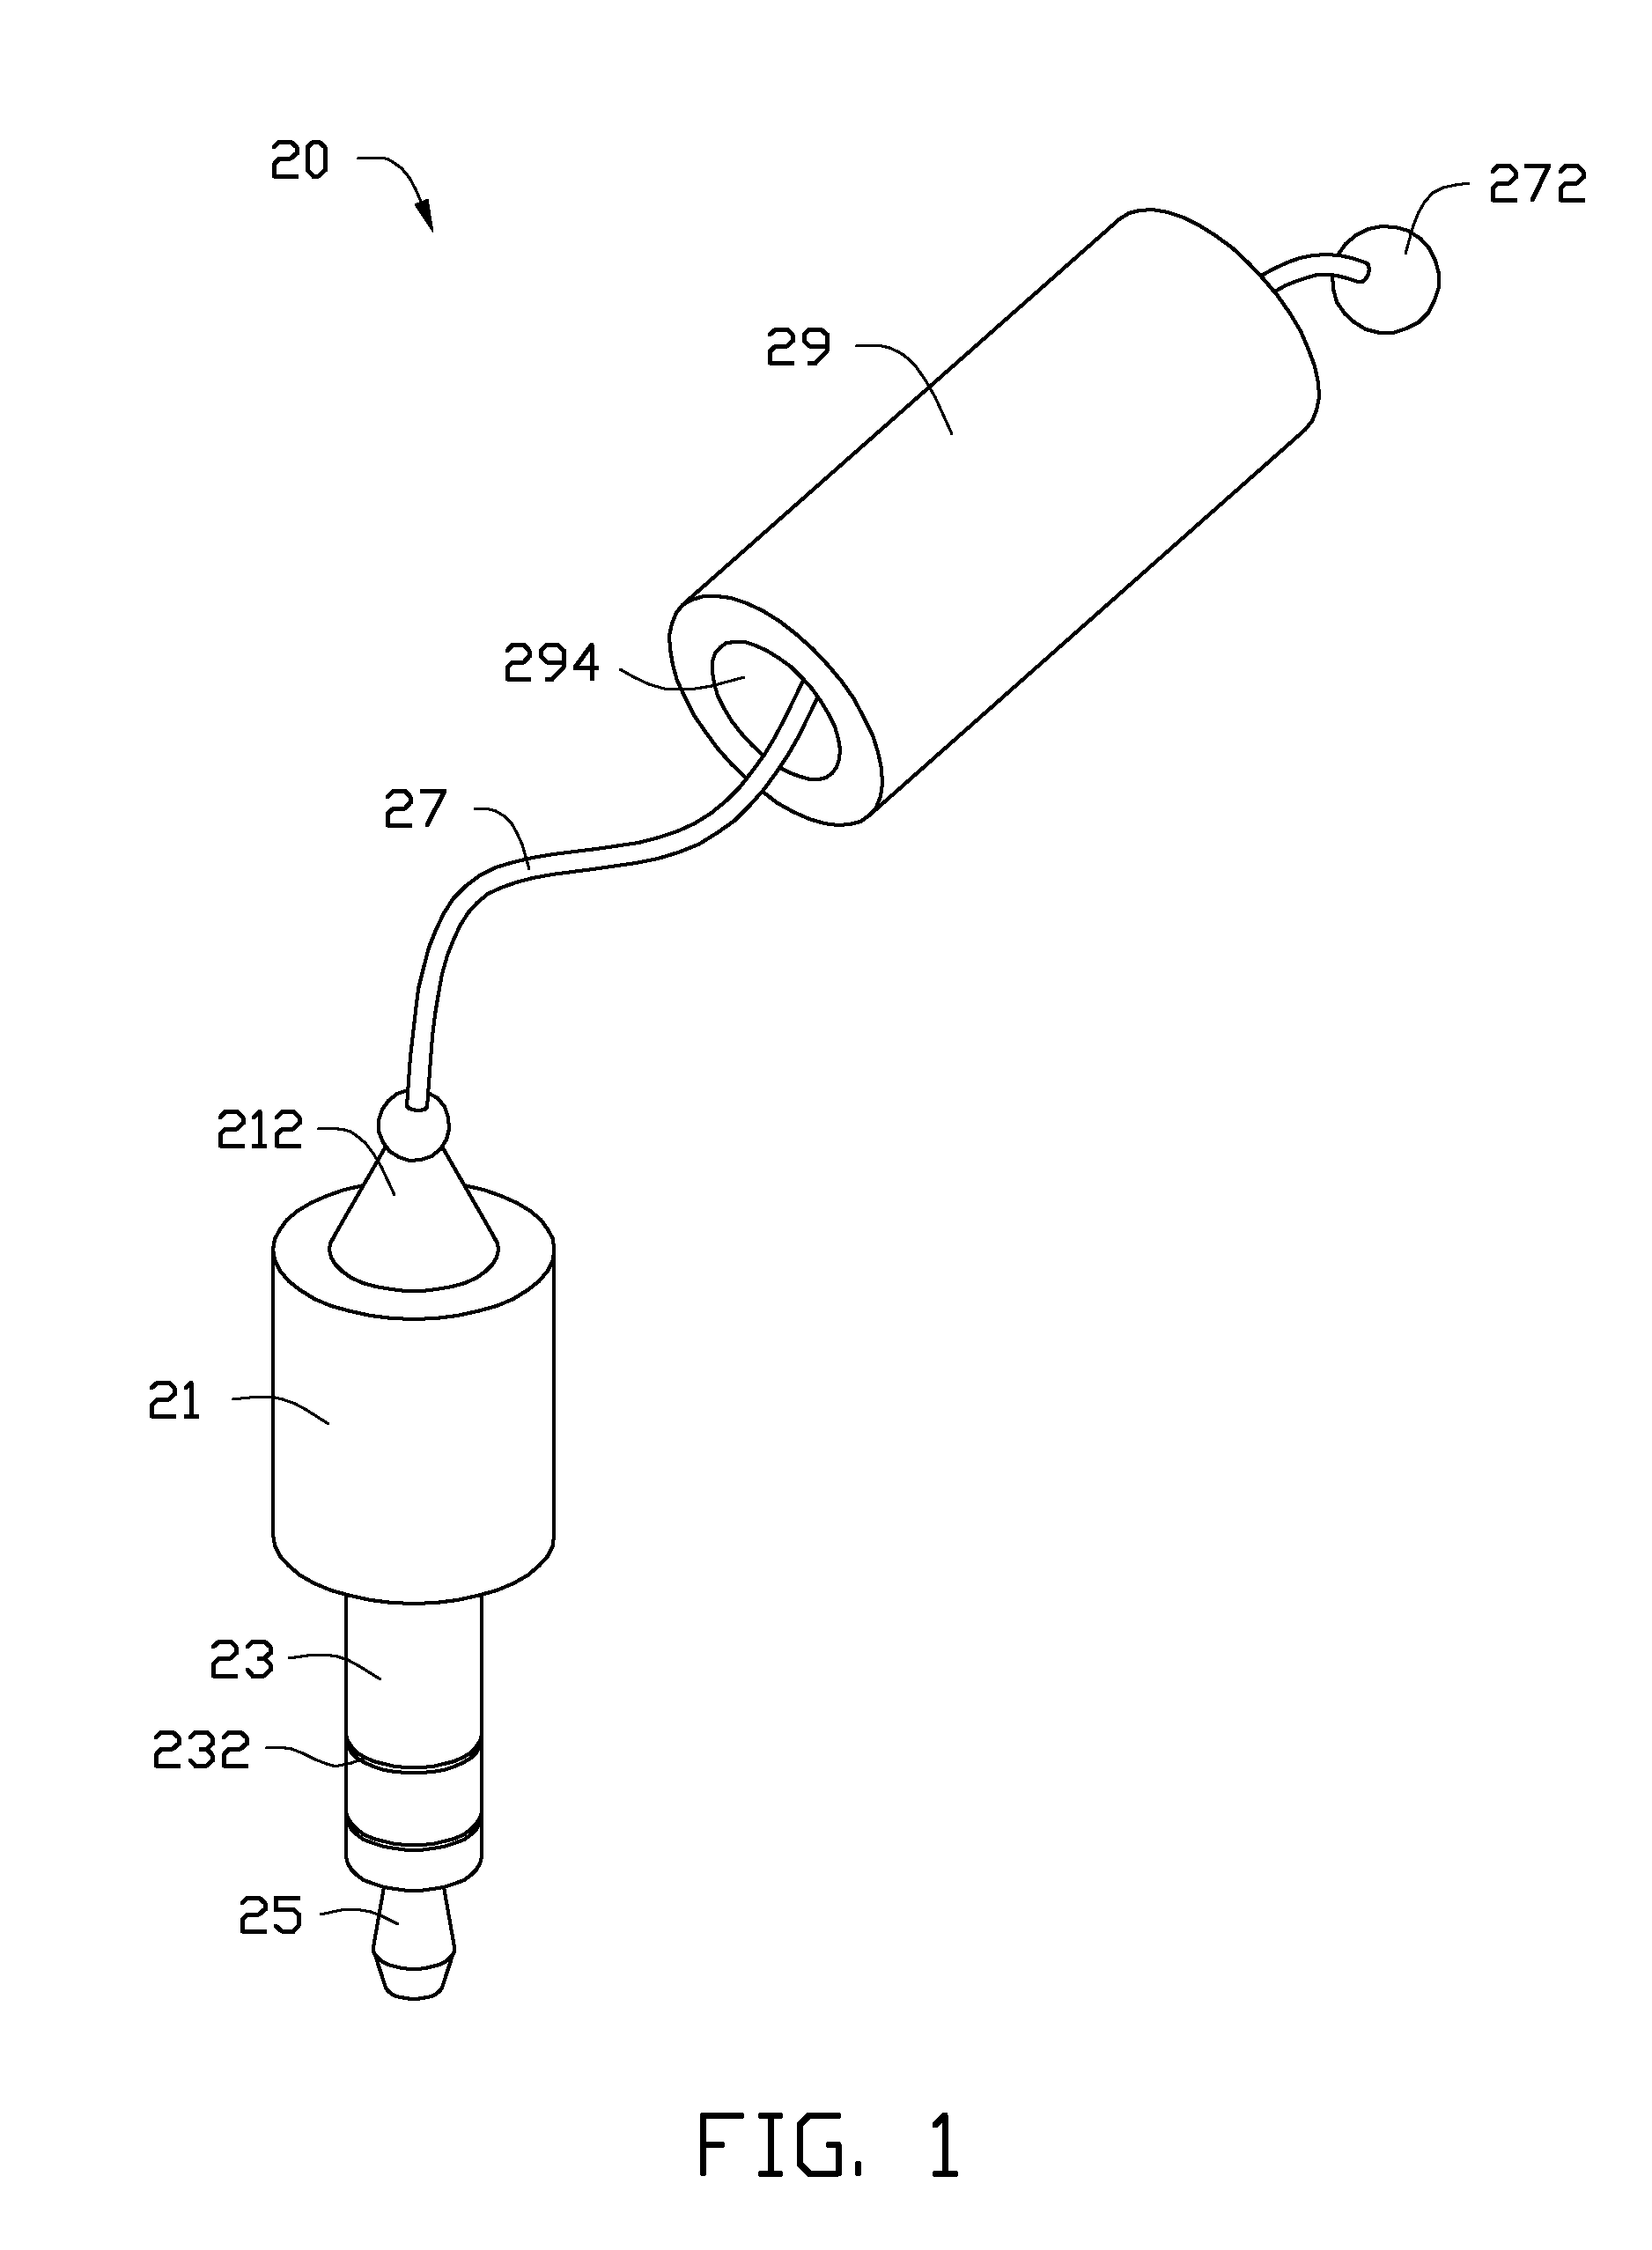 Stylus and portable electronic device using same